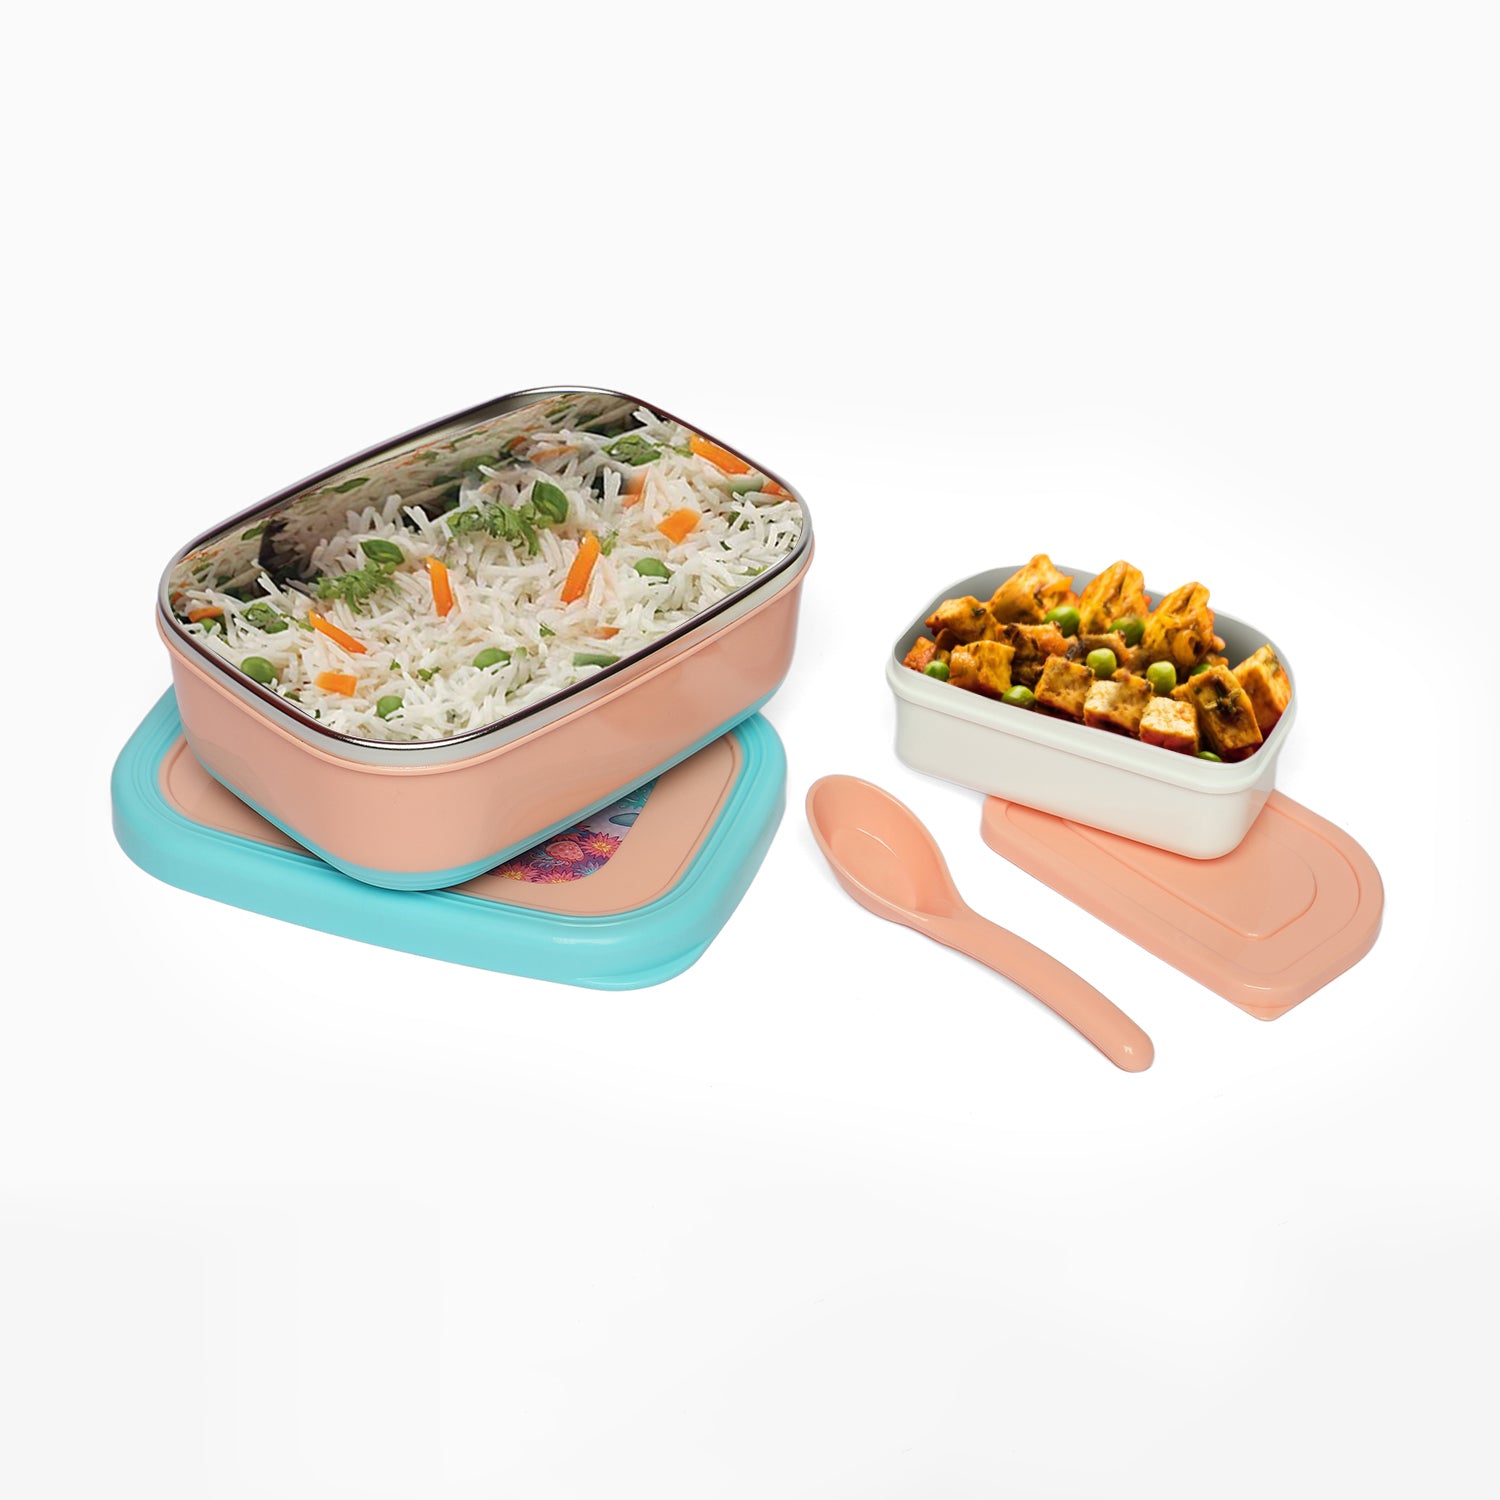 mermaid stainless steel 2 compartment lunch box